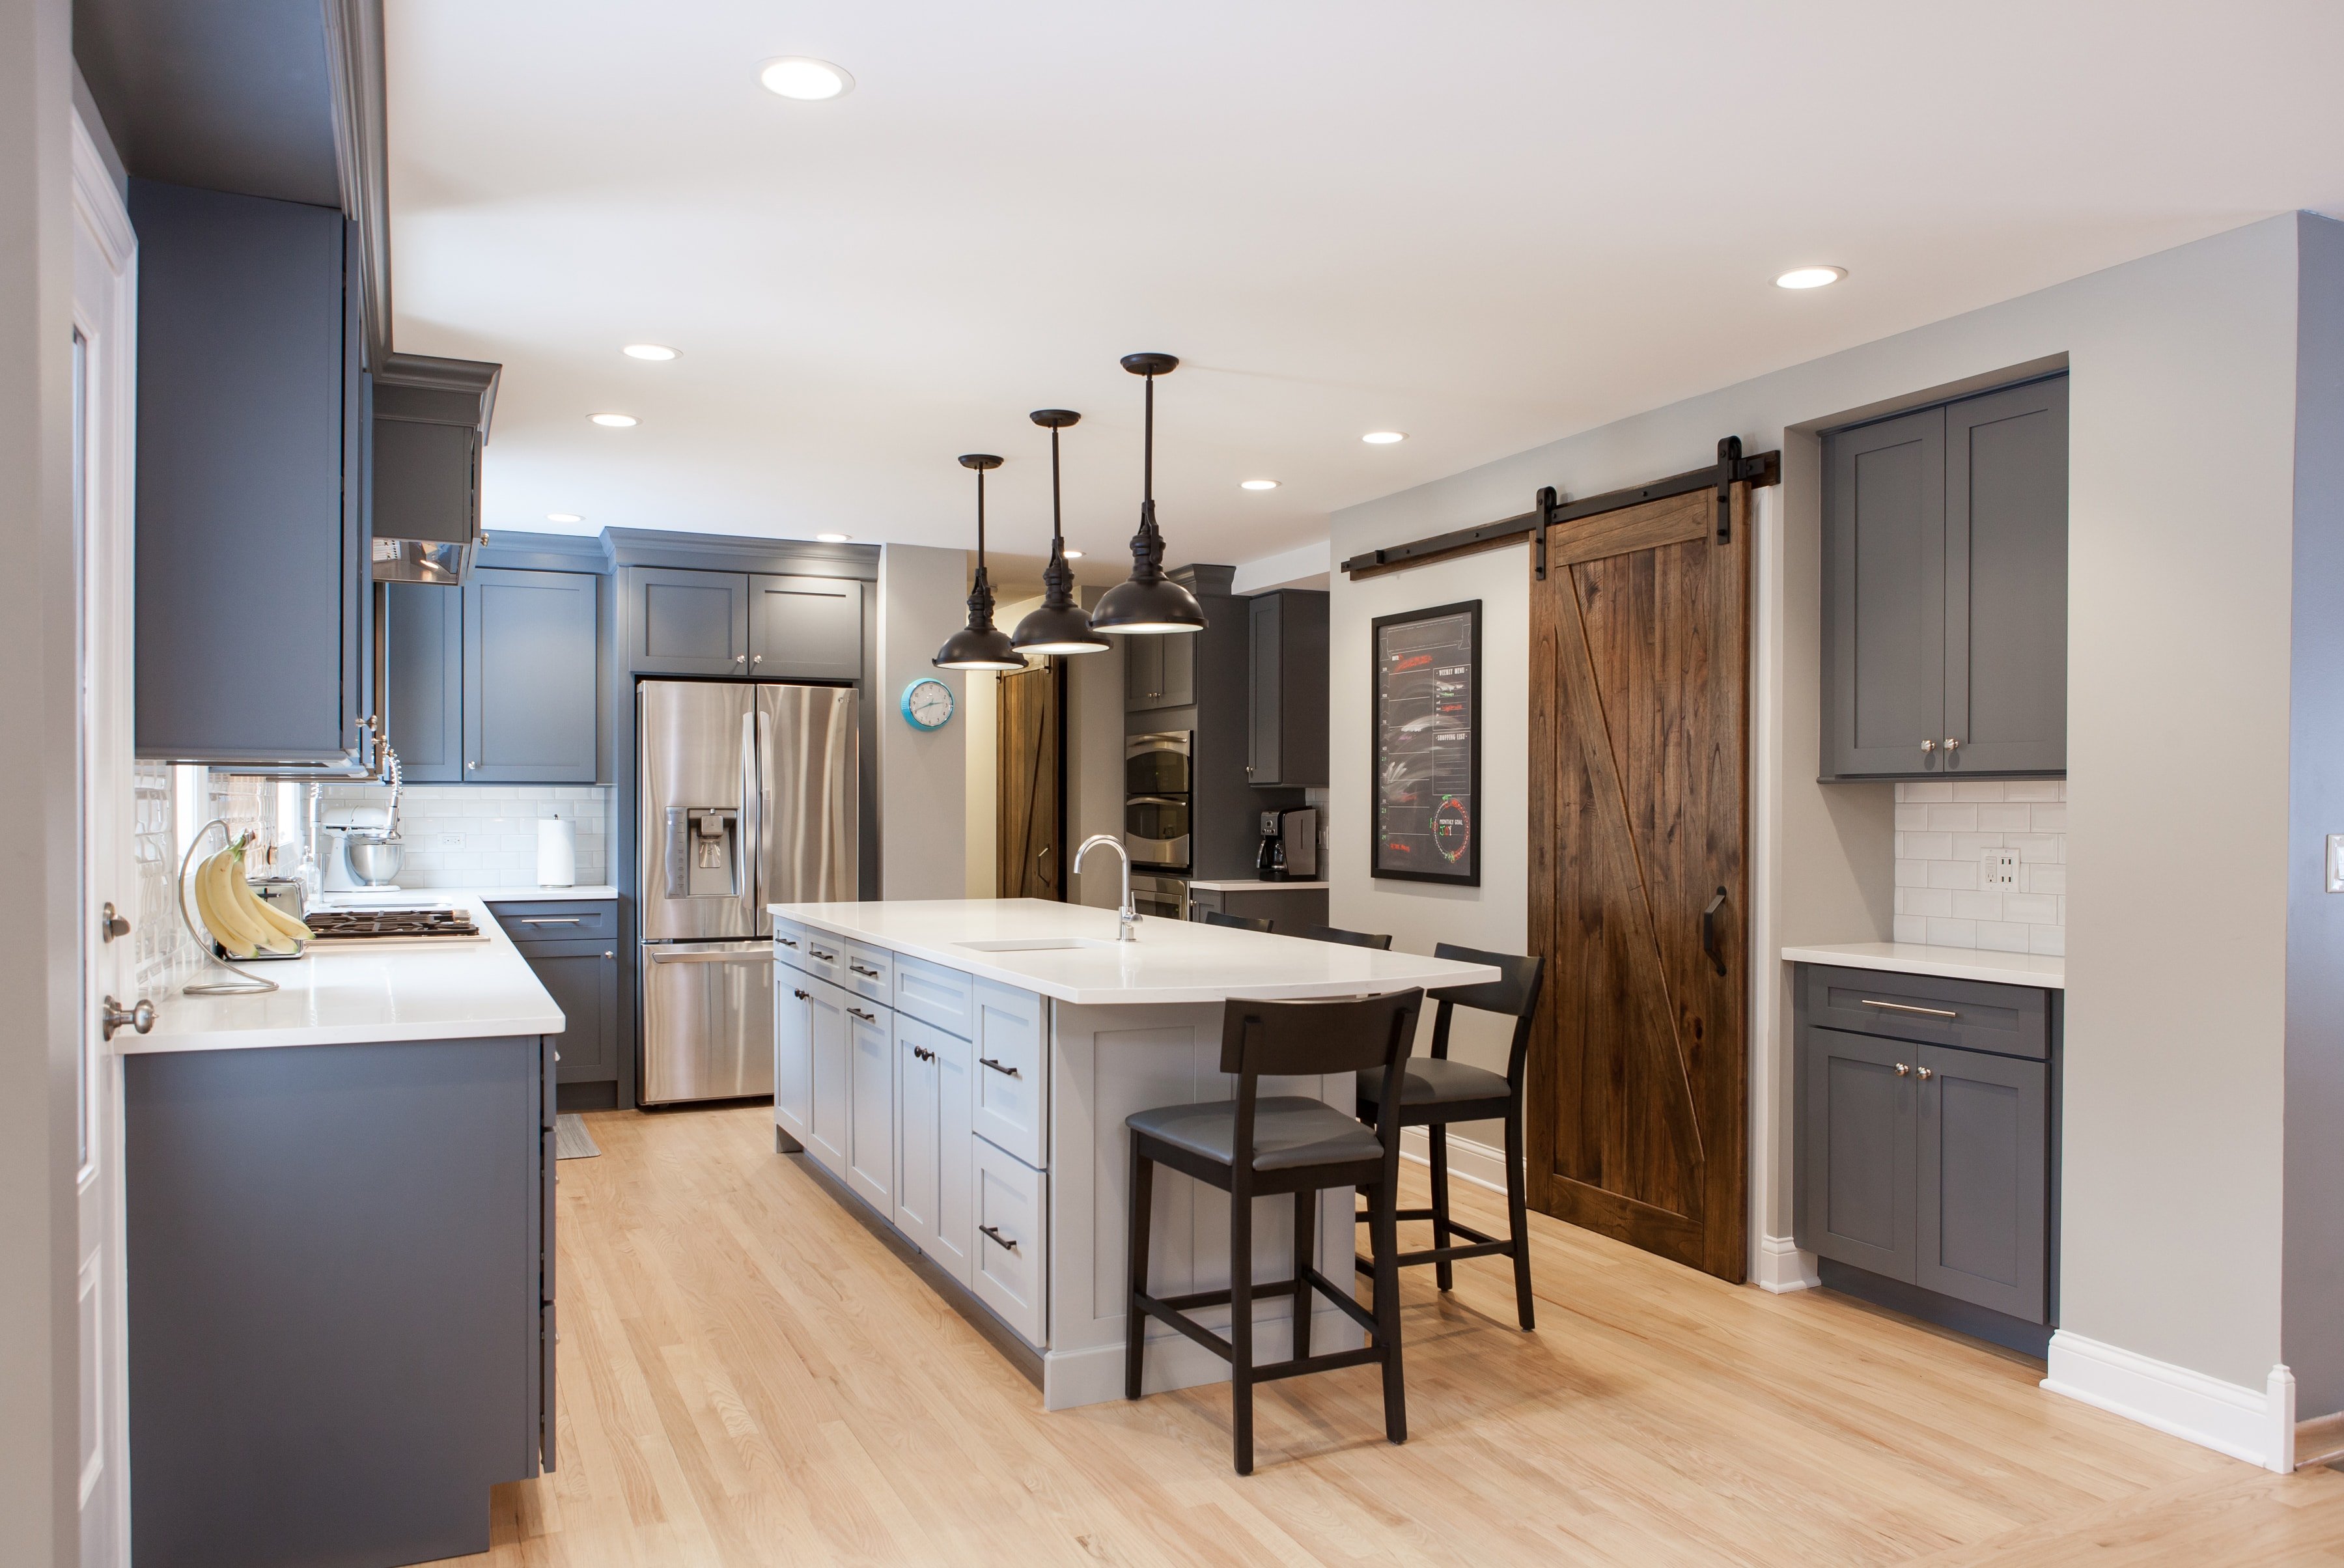 Kitchen Remodel Cost In Chicago, How Much Does It Cost To Remodel A Kitchen On Budget